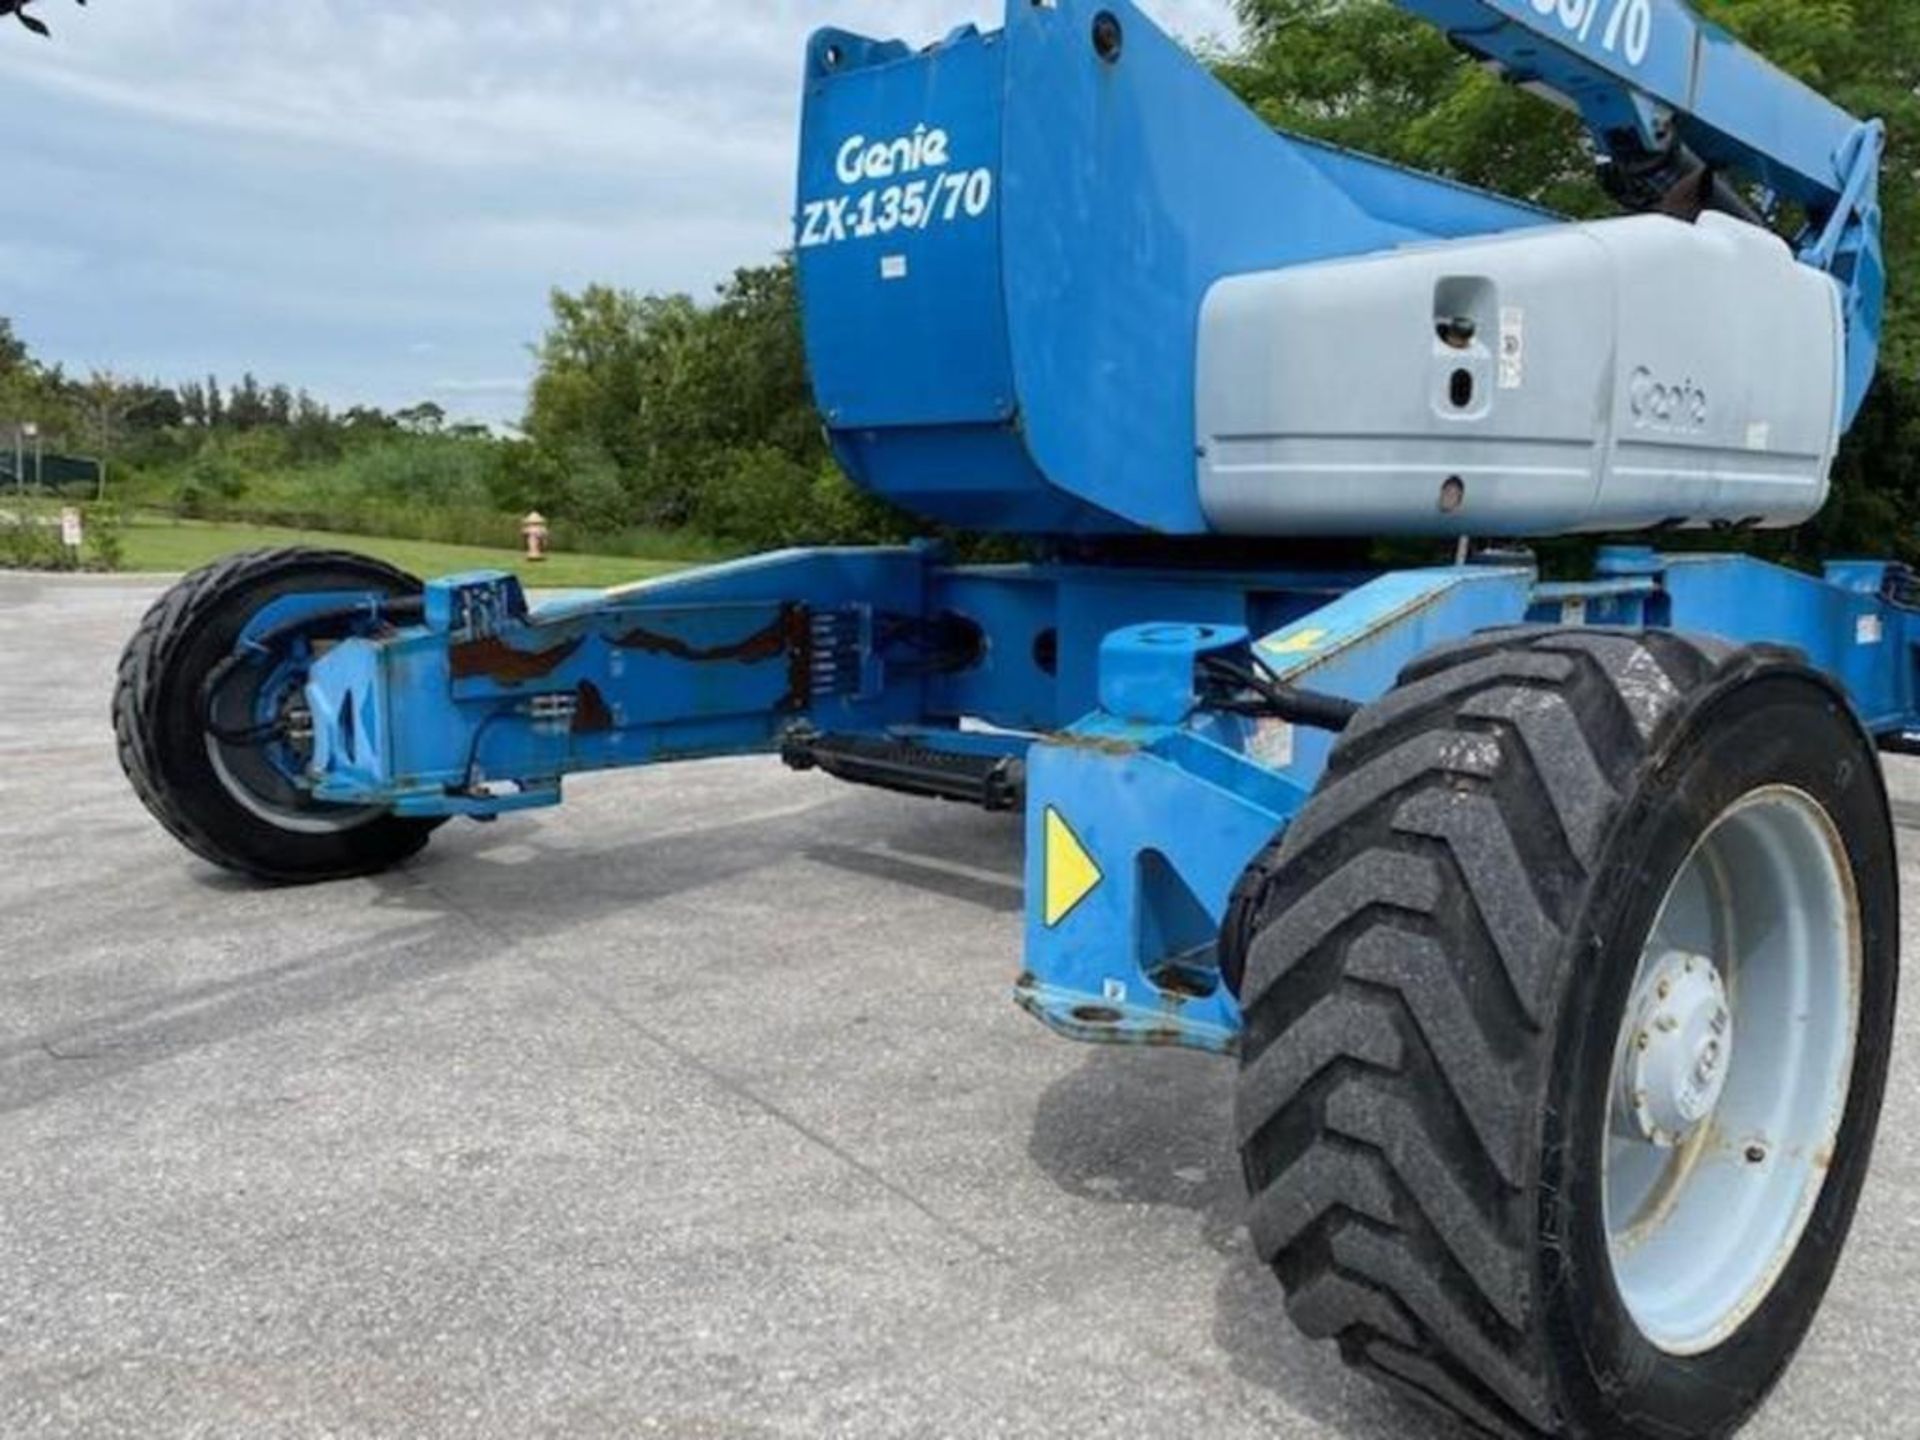 2013 GENIE ZX 135/70 DIESEL ARTICULATING BOOM LIFT, CRAB STEERING AND EXTENDABLE LEGS - Image 14 of 38